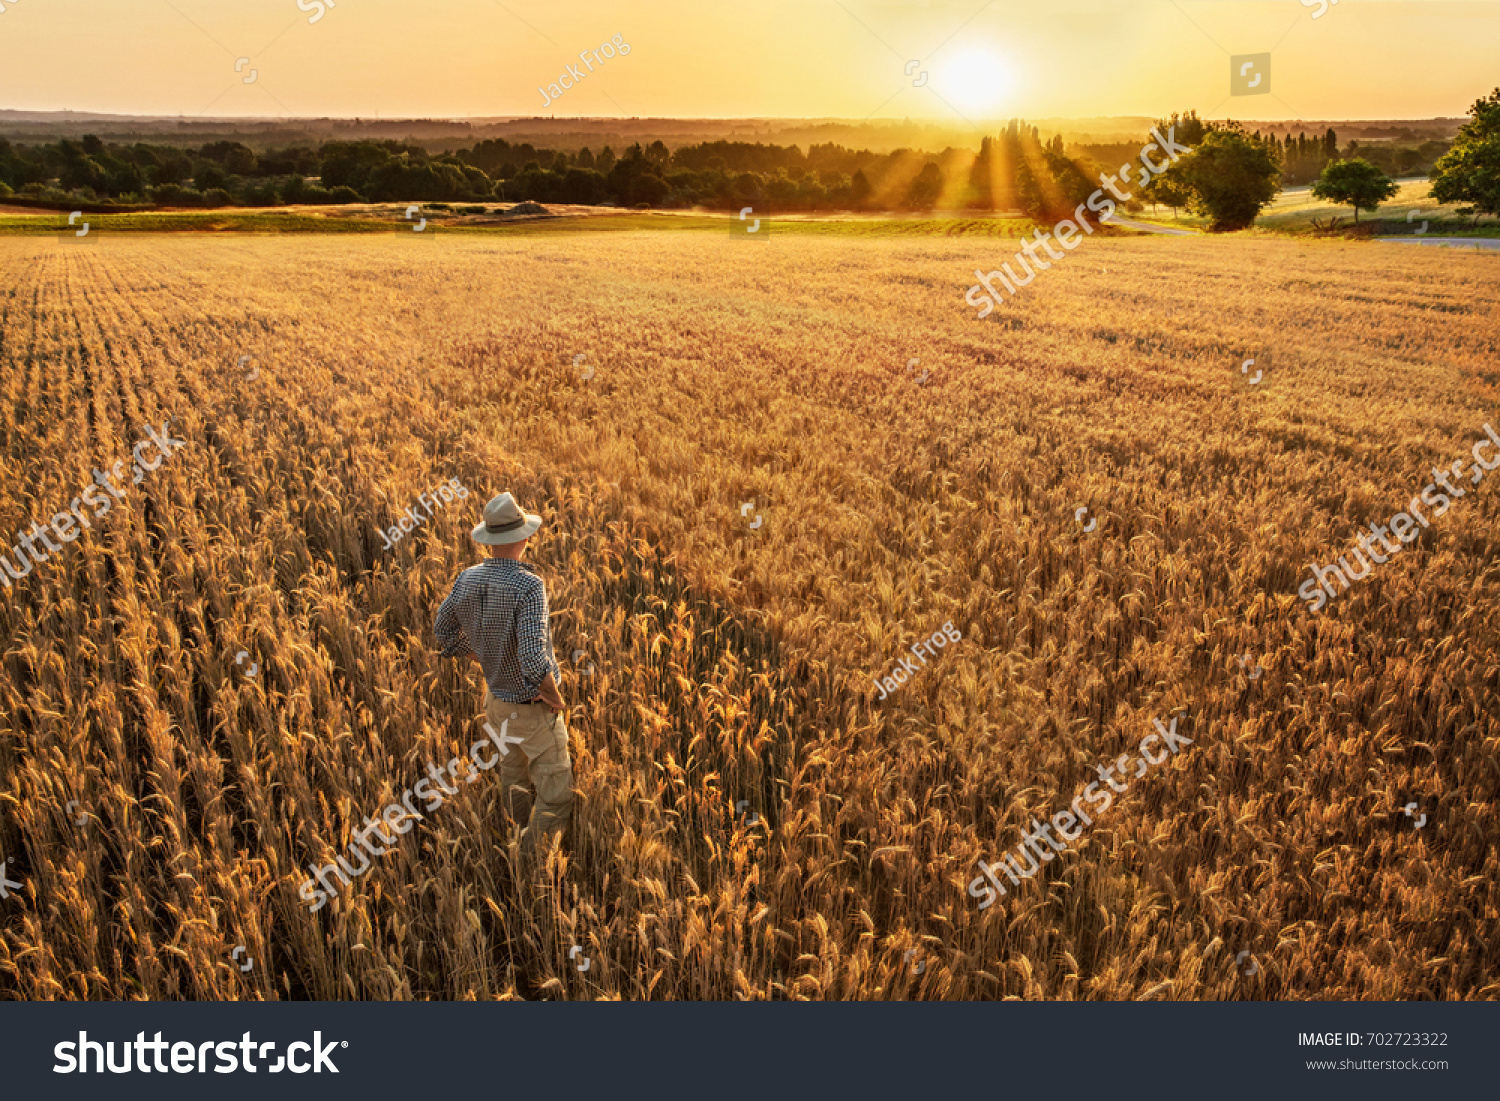 Top view. A farmer standing in his wheat field at sunset. He is watching his crops. #702723322